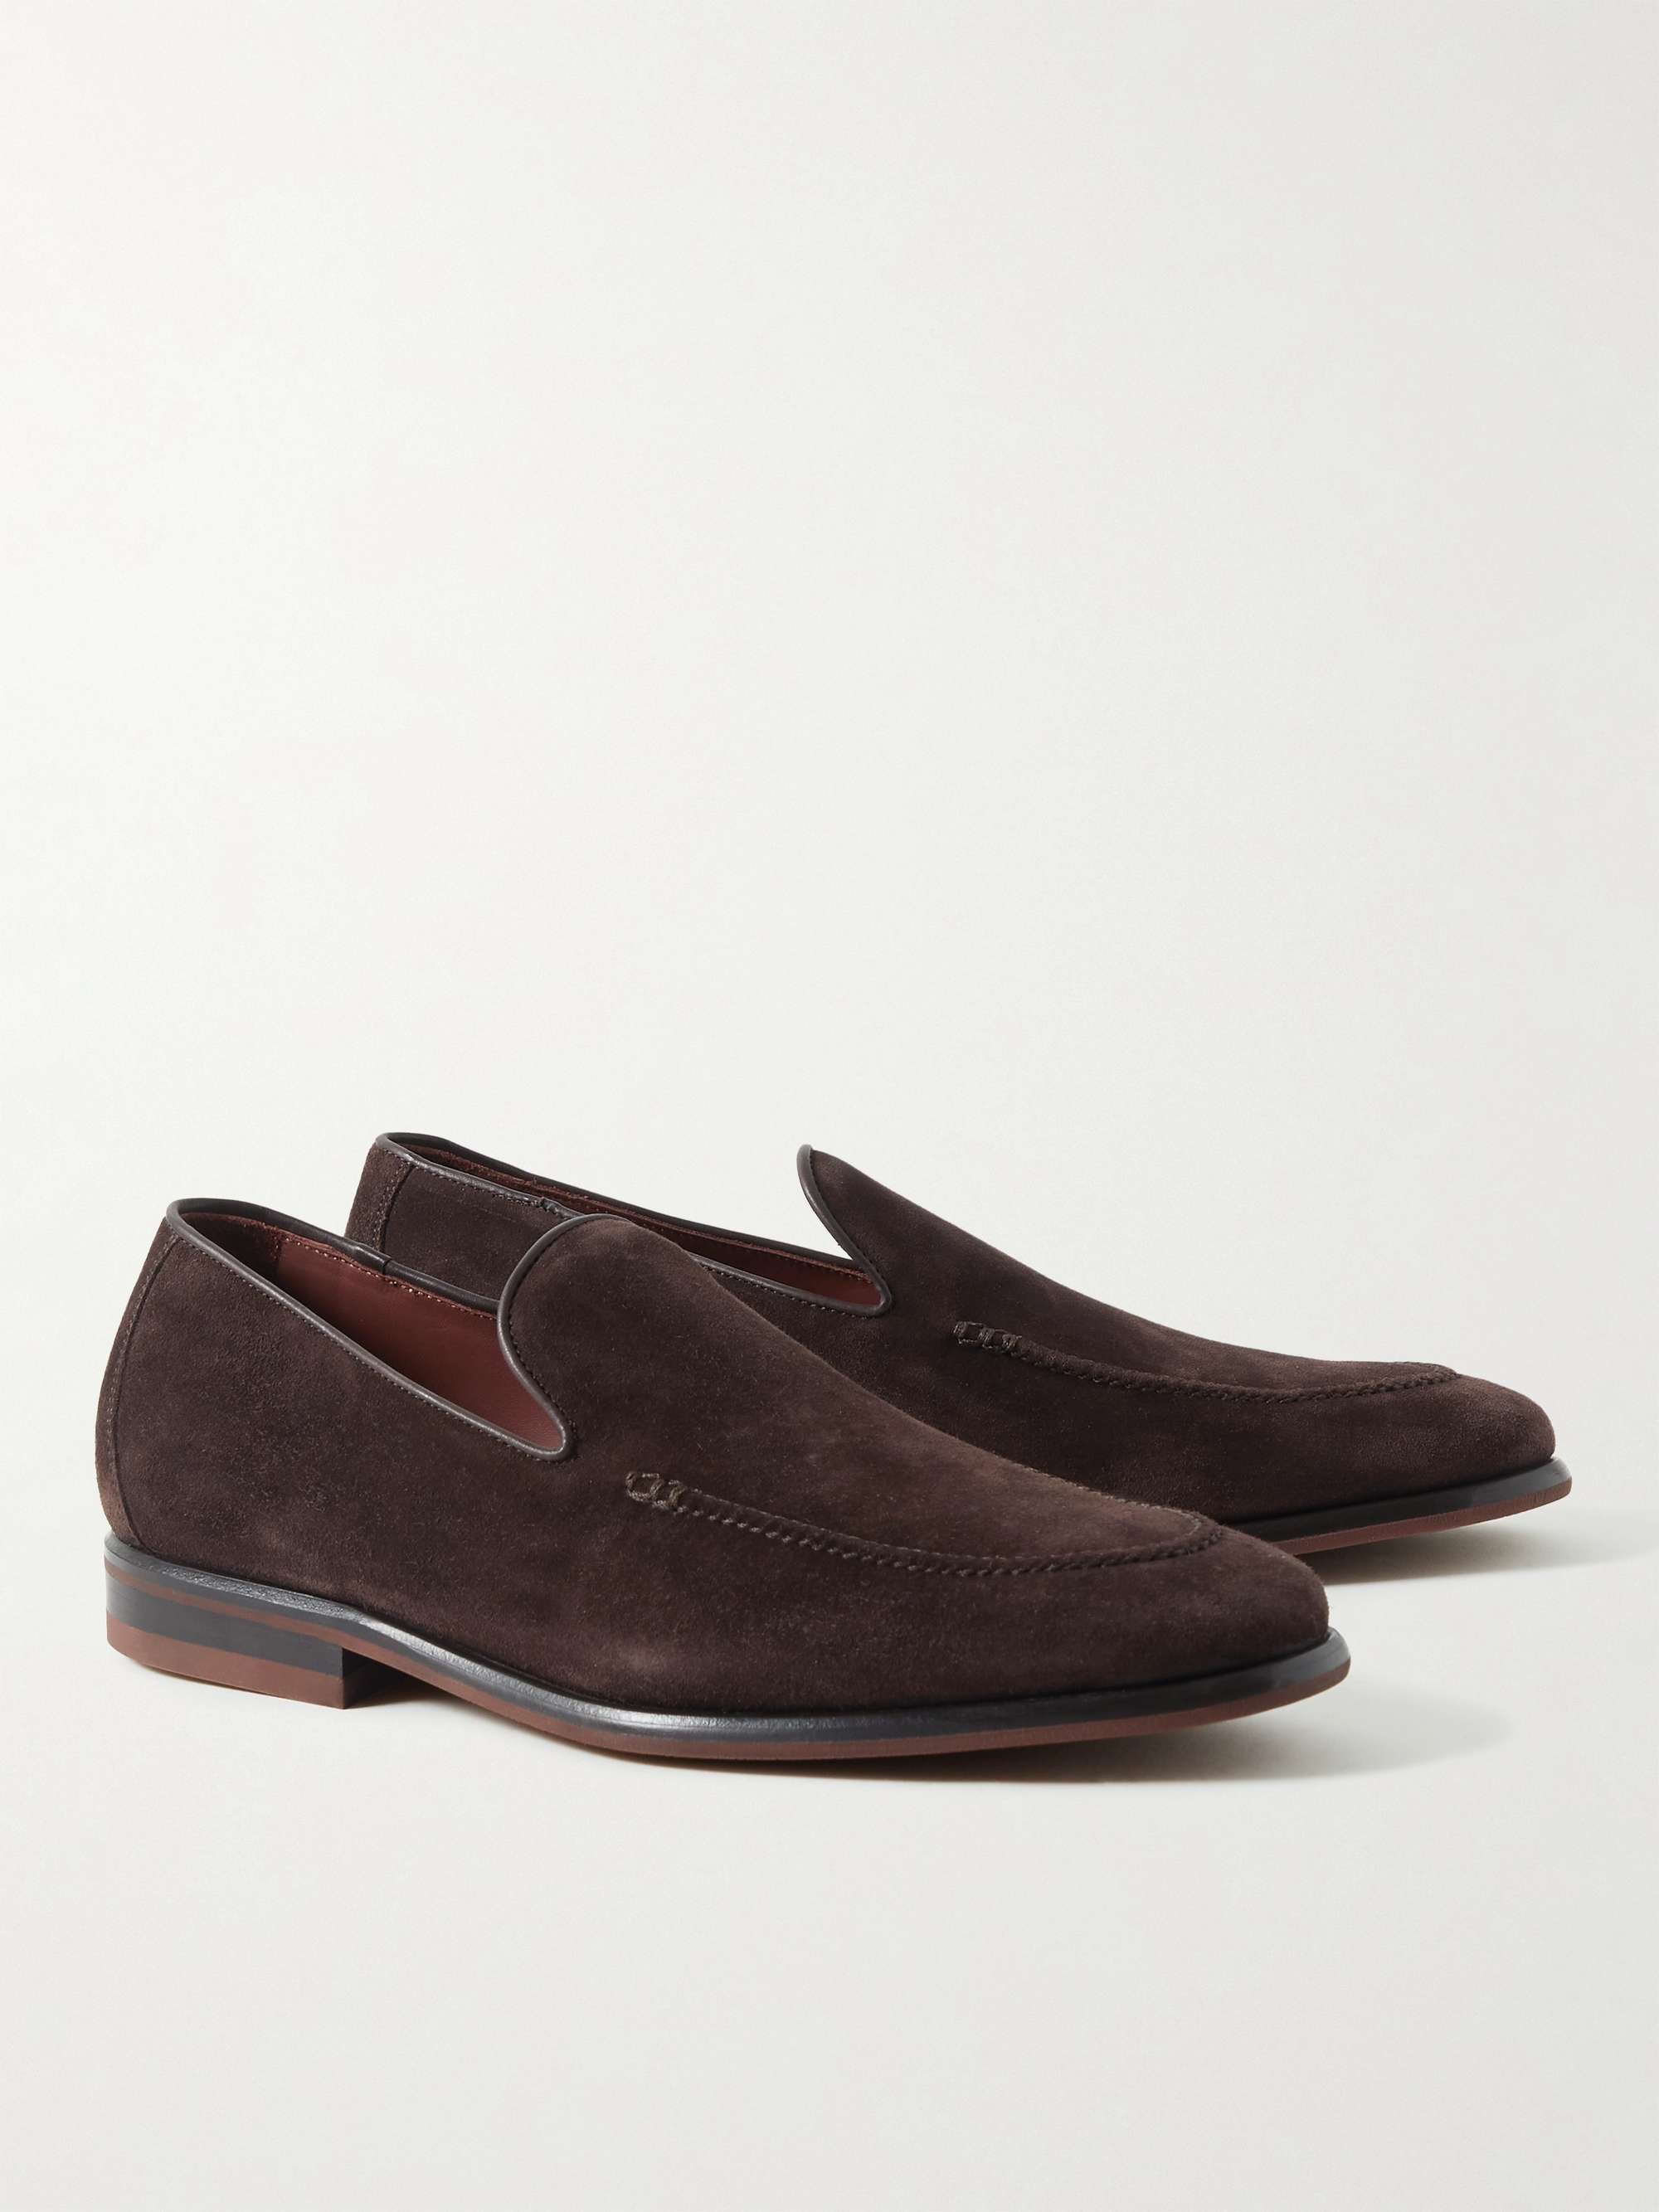 LORO PIANA City Suede Loafers for Men | MR PORTER